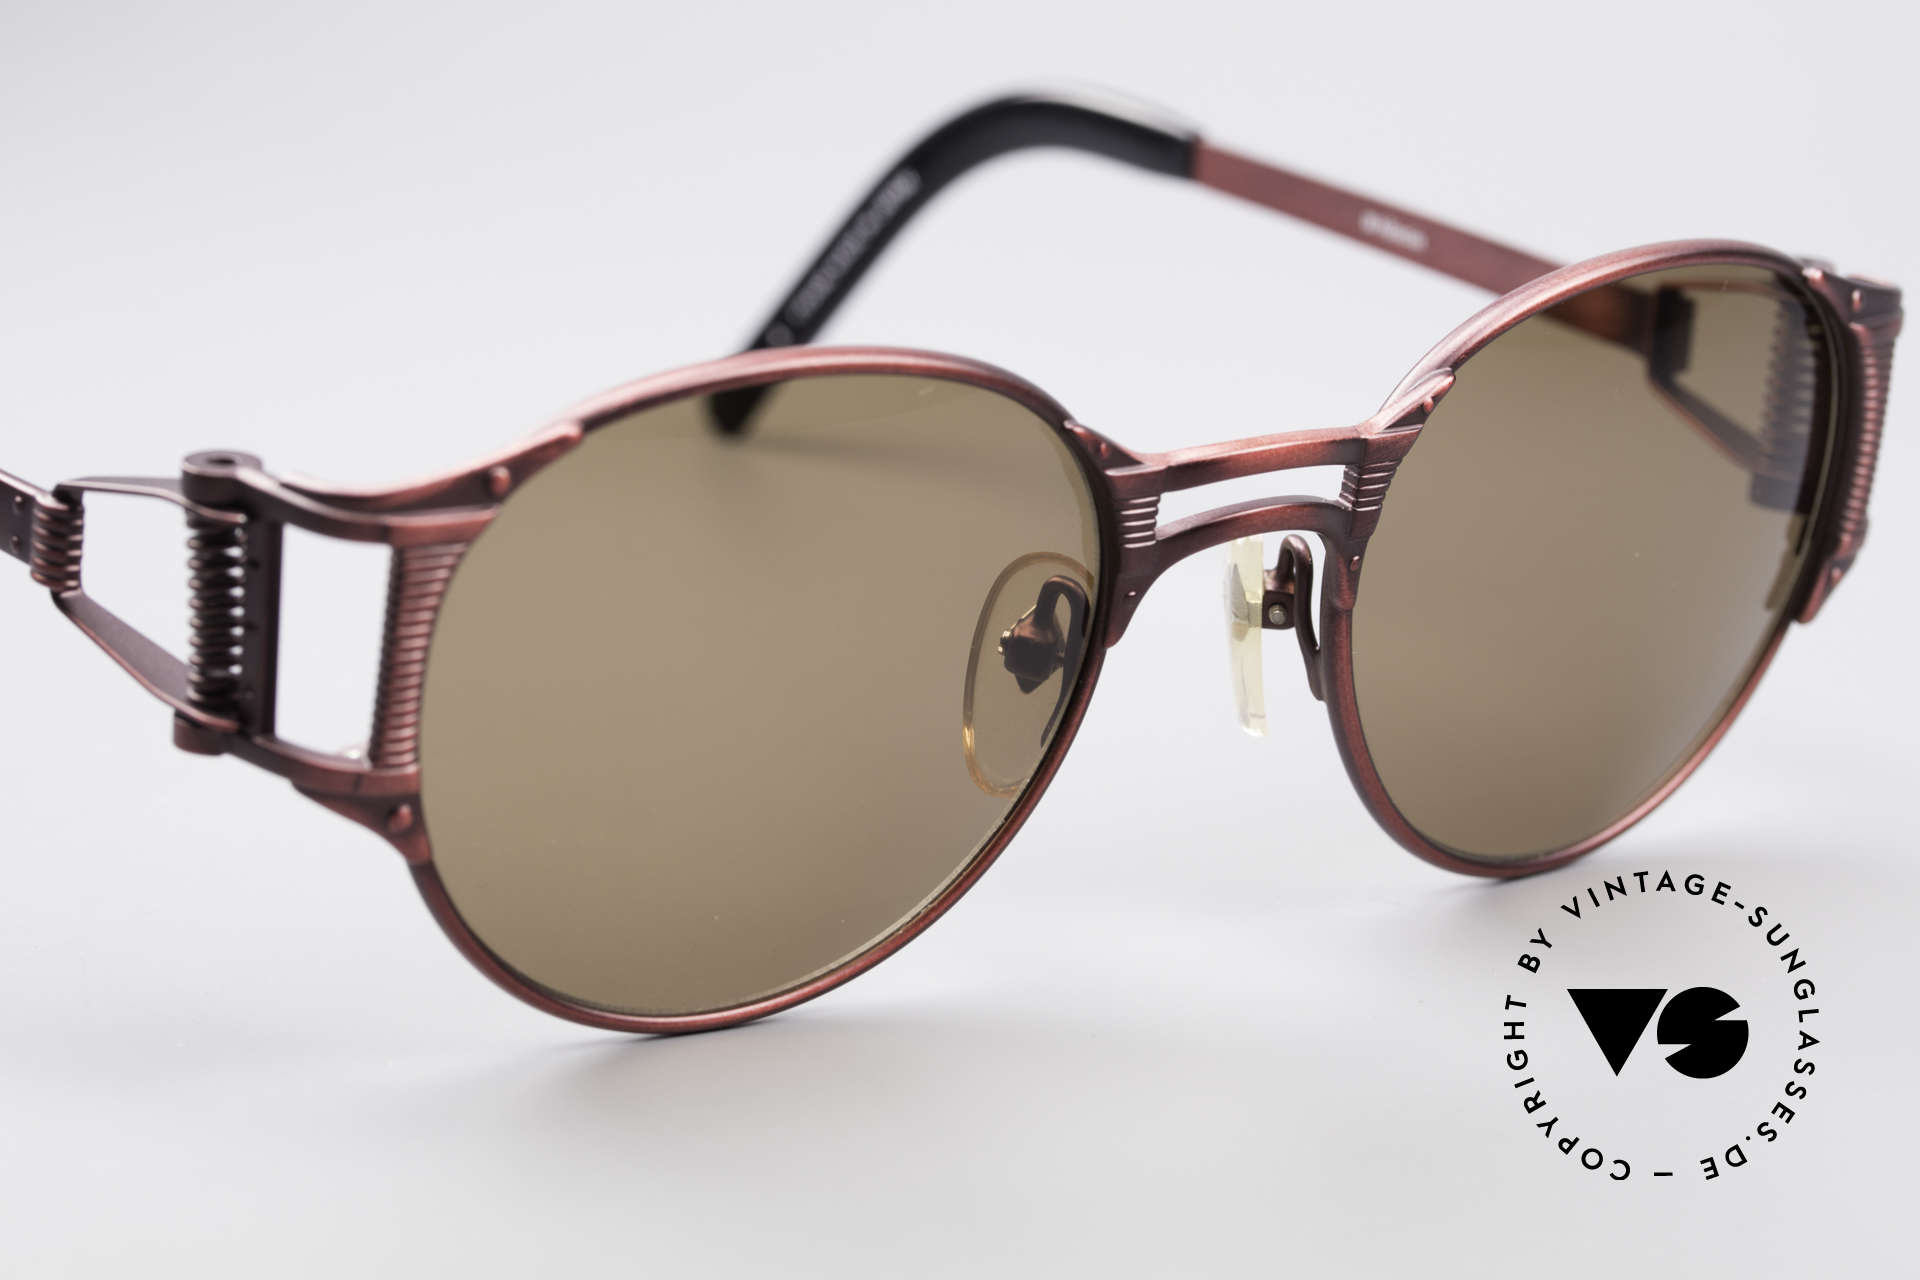 Jean Paul Gaultier 56-5105 Rare Celebrity Sunglasses, unworn (like all our vintage Gaultier designer shades), Made for Men and Women